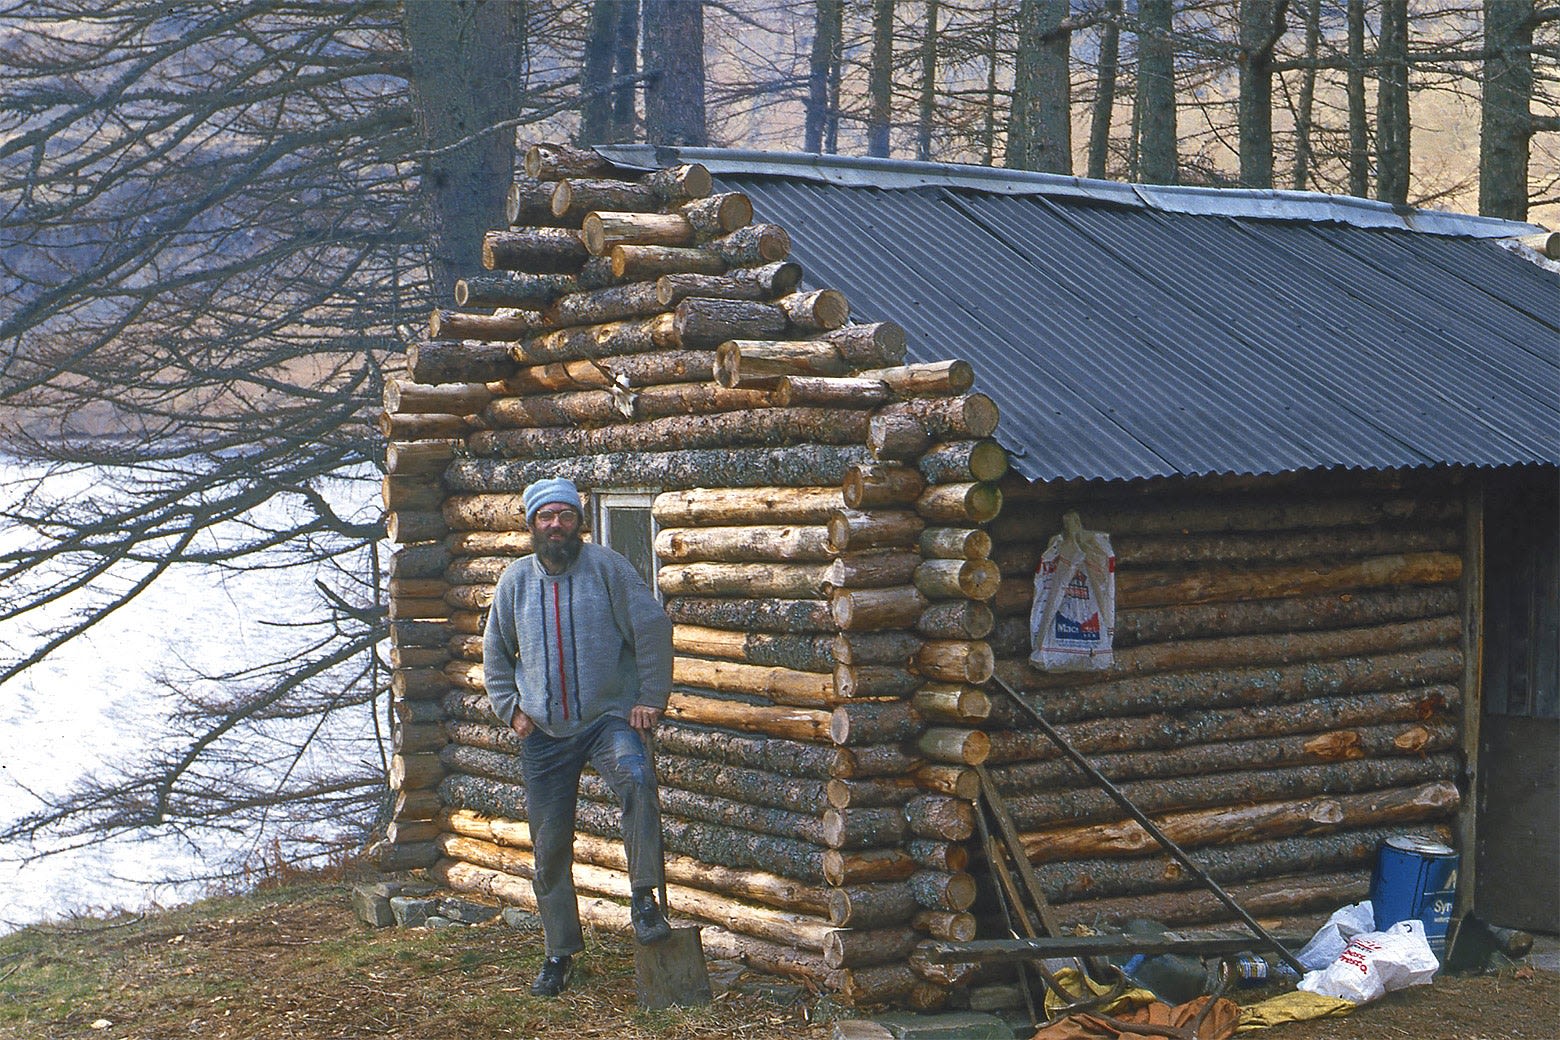 What I Learned From a Hermit Who’s Lived in a Remote Scottish Cabin for 40 Years